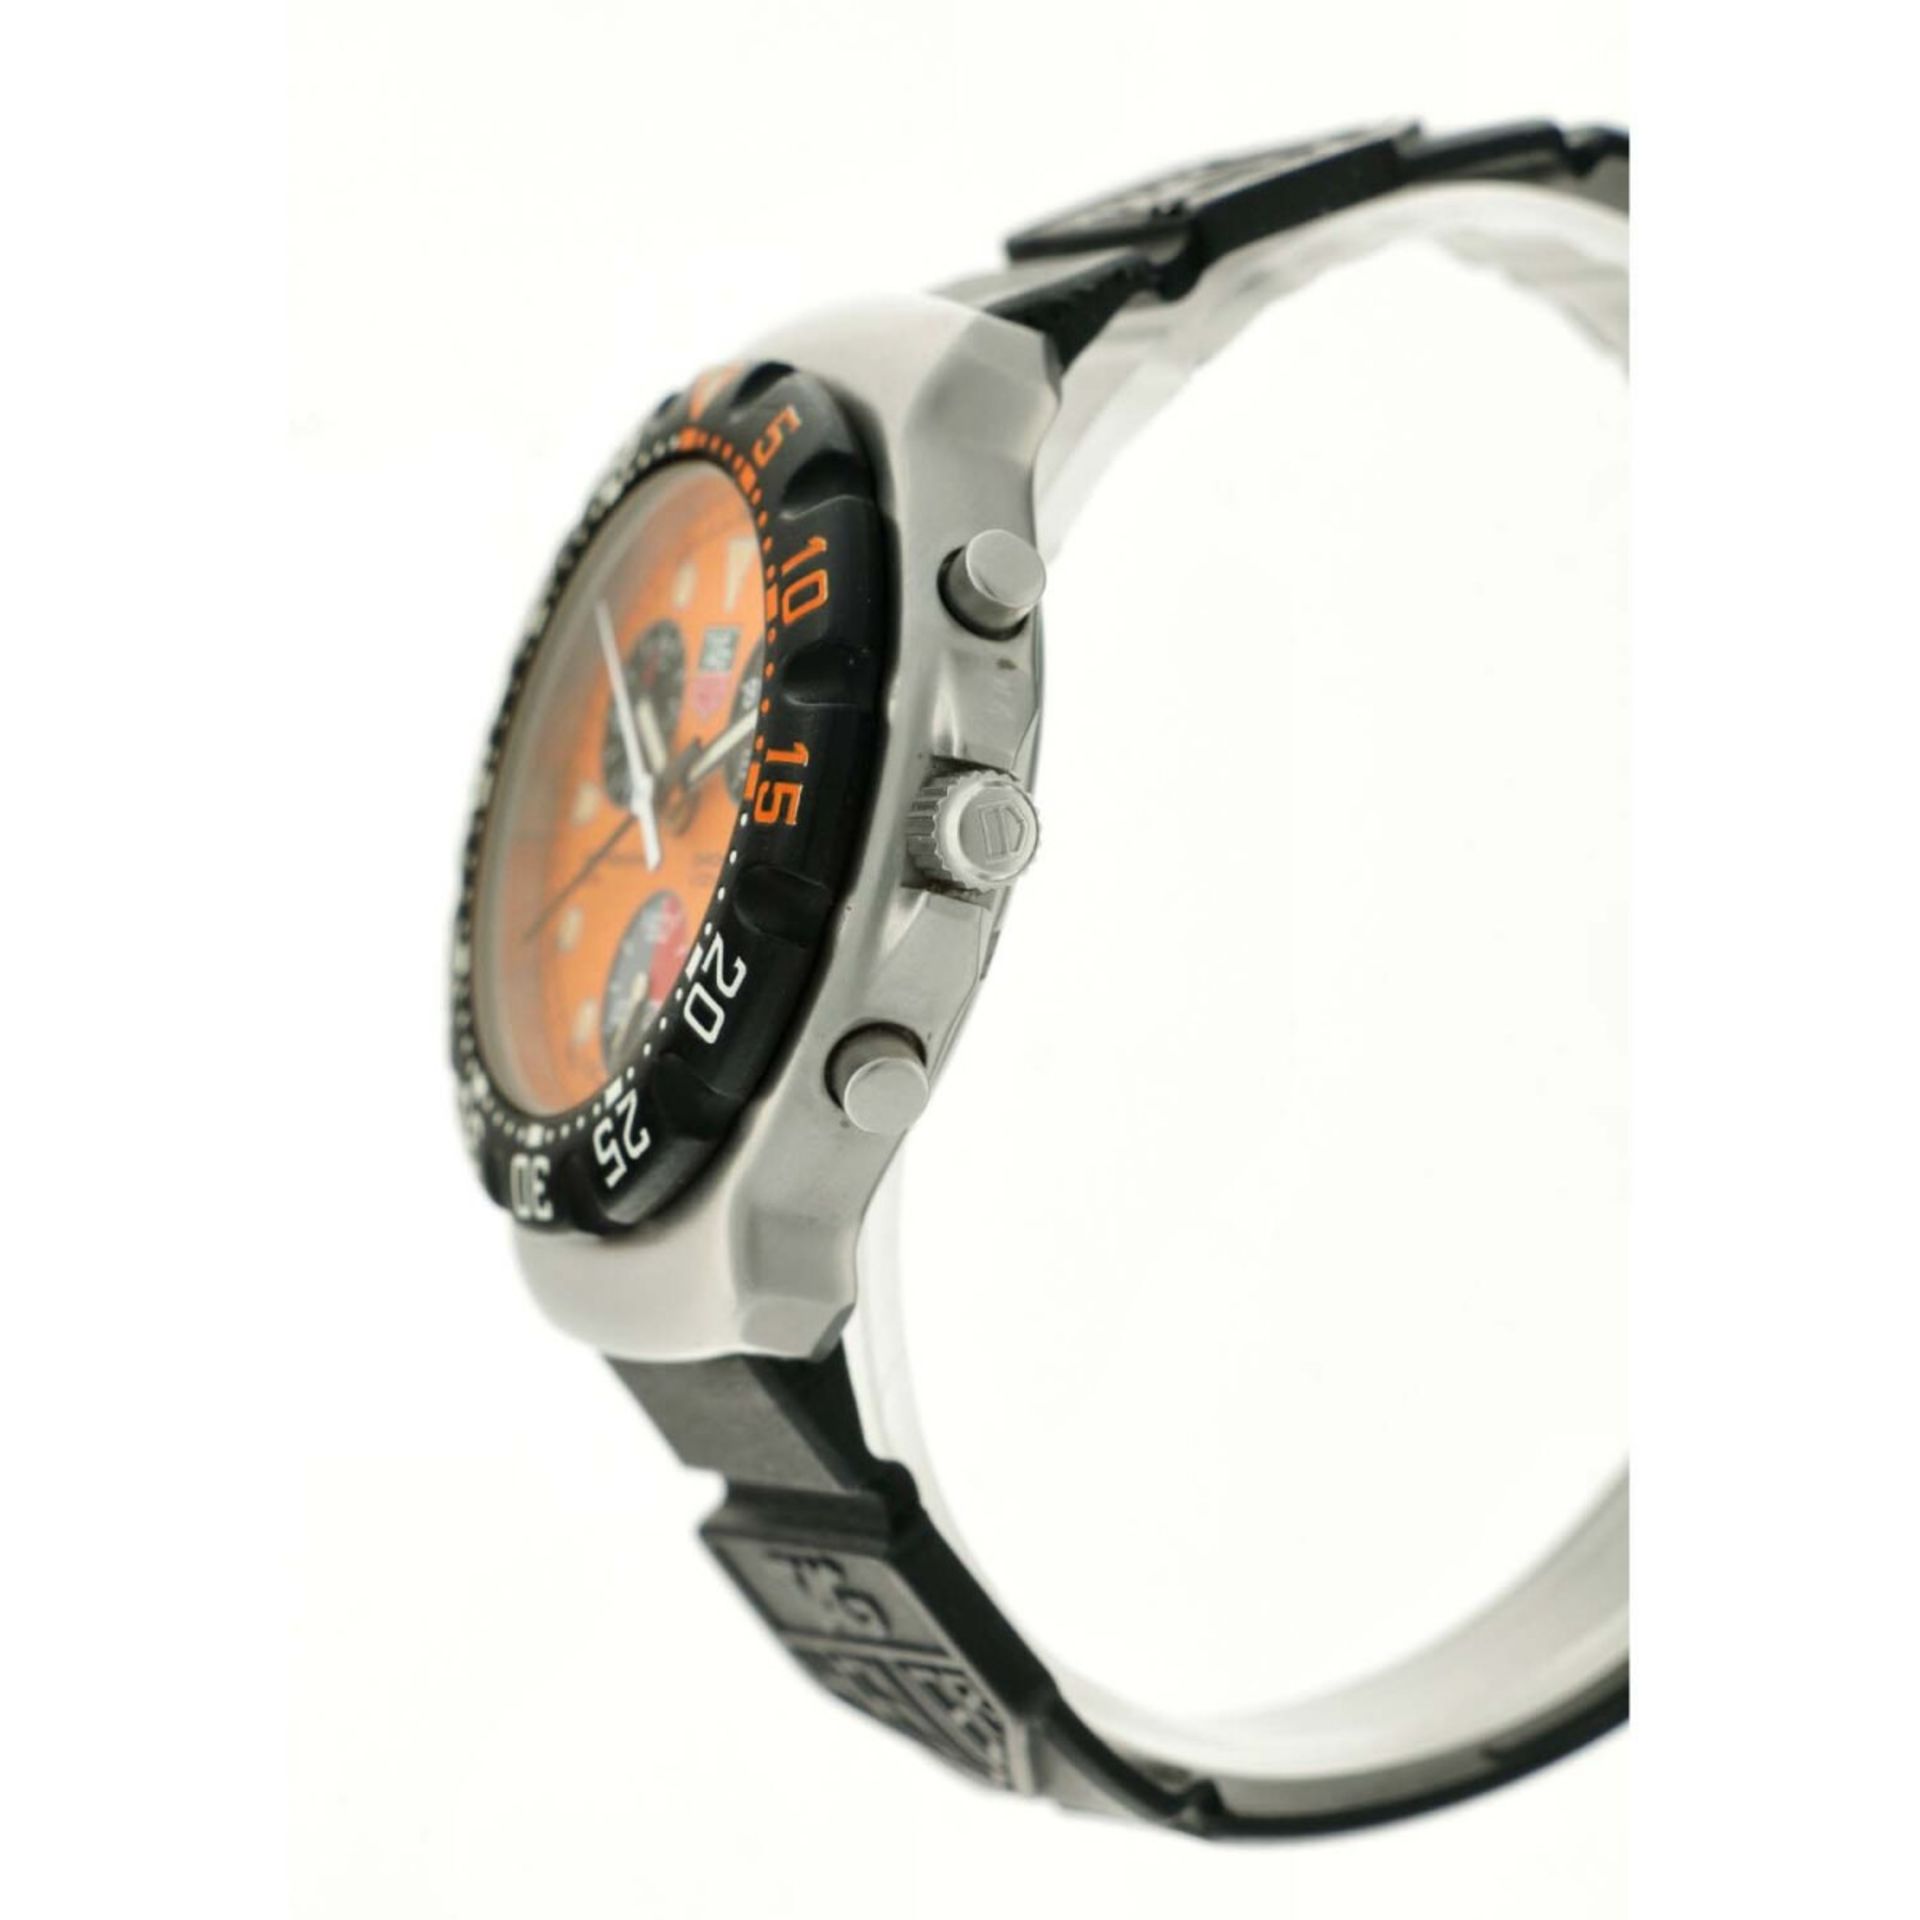 Tag Heuer - Professional 200 - Men's Watch - appr. 2000 - Image 5 of 5